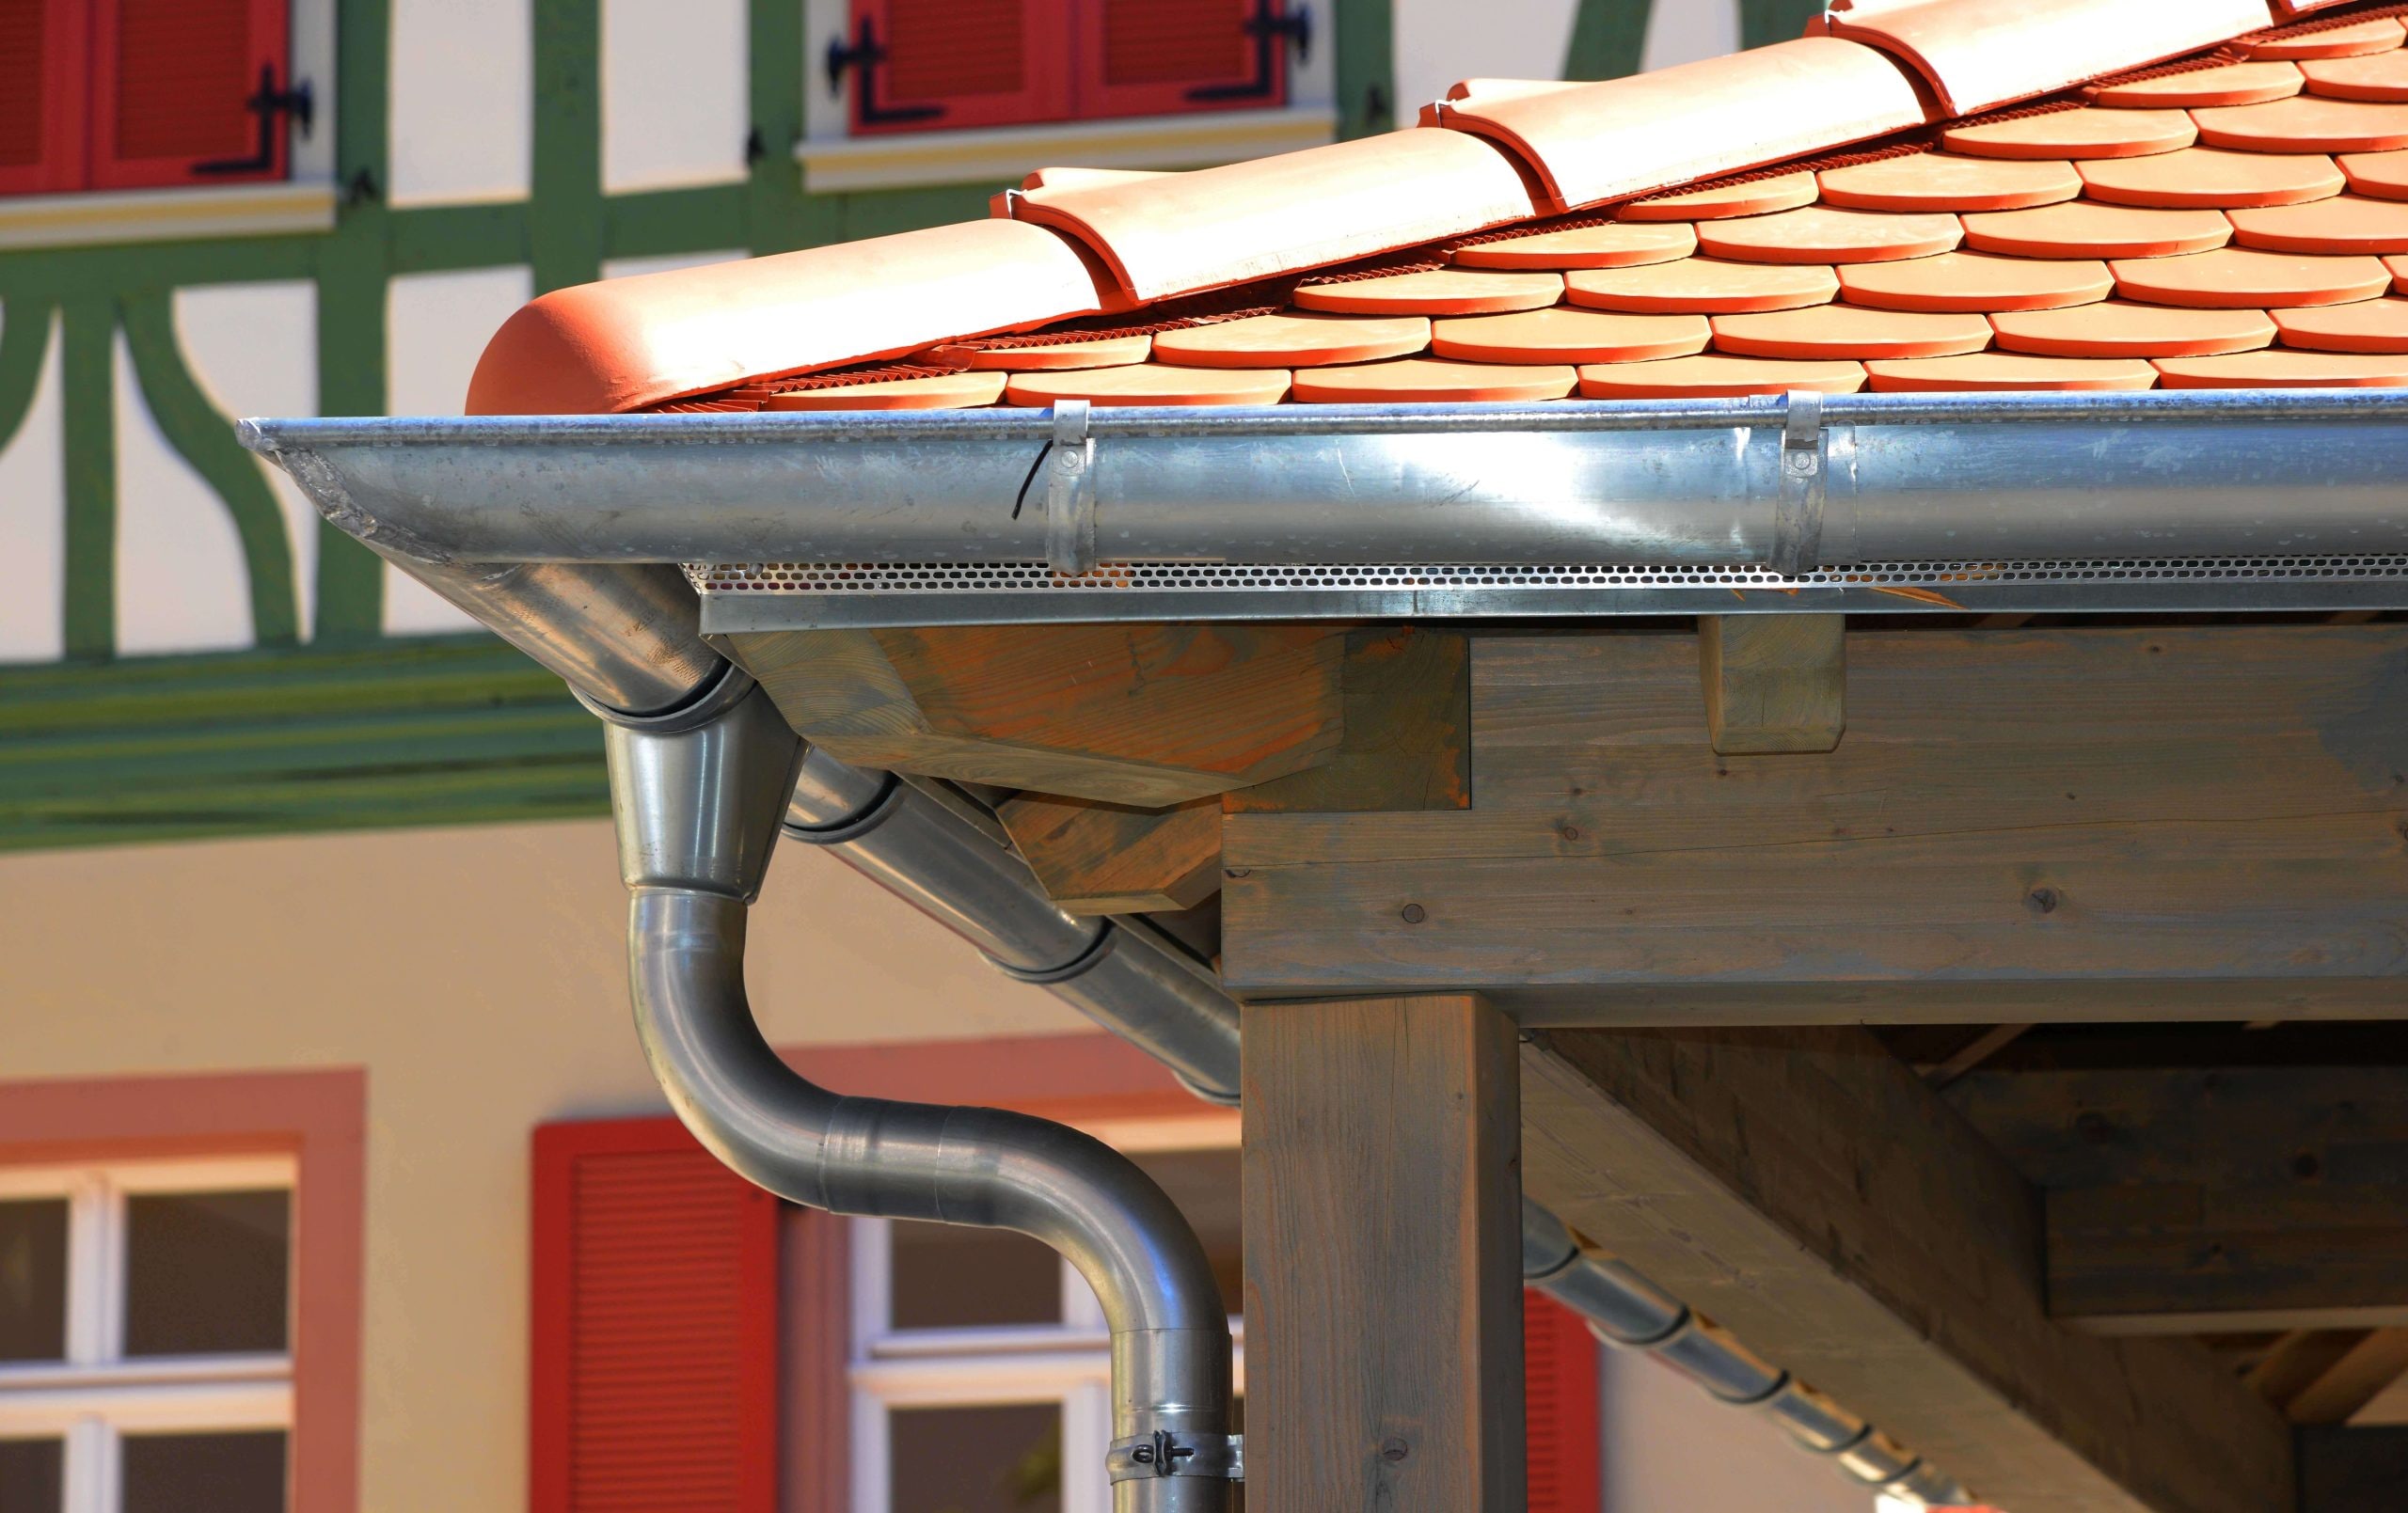 Corrosion-resistant steel gutters for effective rainwater drainage in Savannah